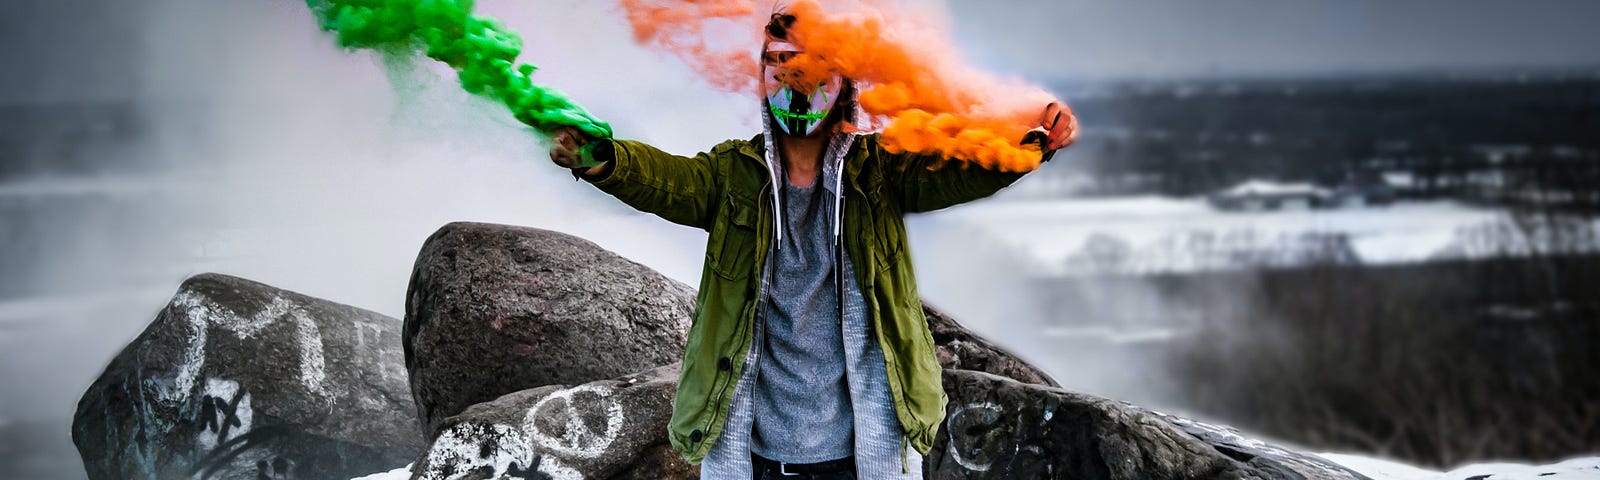 A man holding green and orange flares